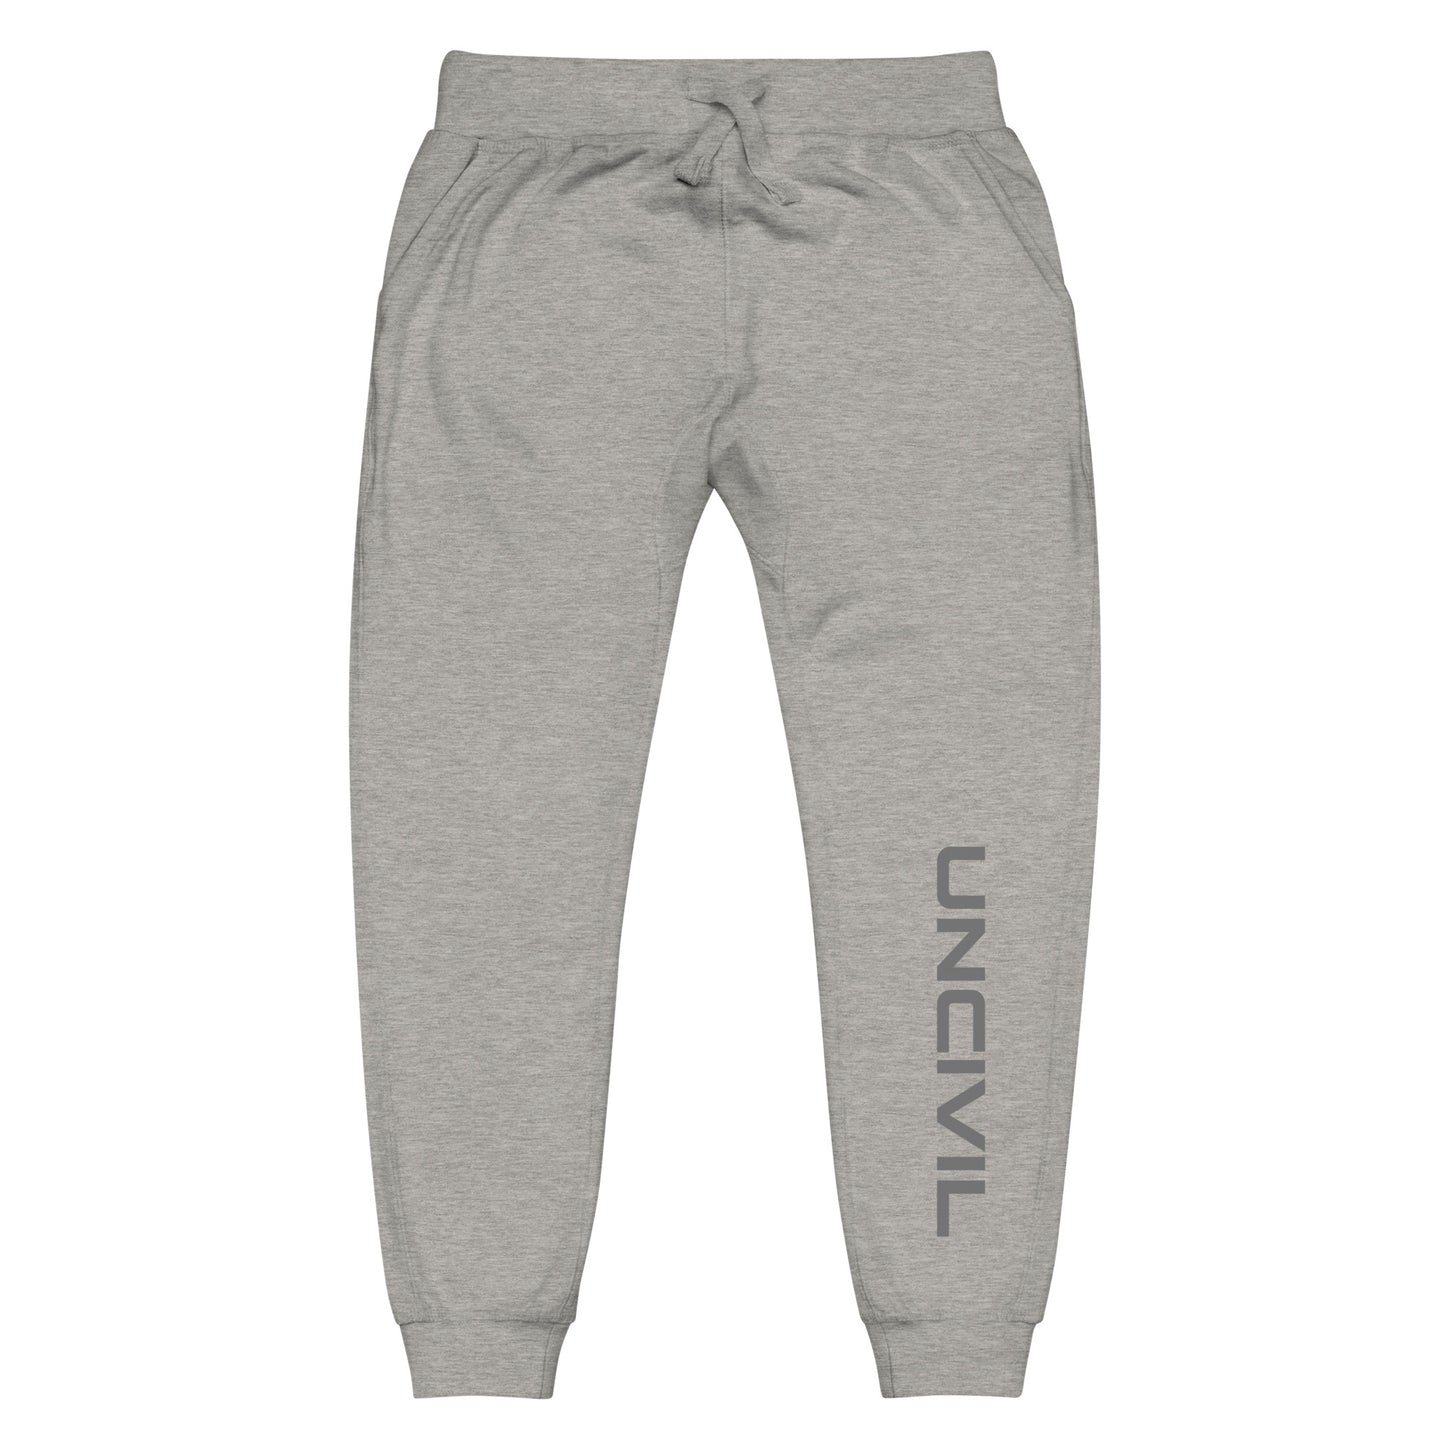 Carbon Grey sweatpants, UNCIVIL on front left leg and UNCIVIL patch on the back right pocket.